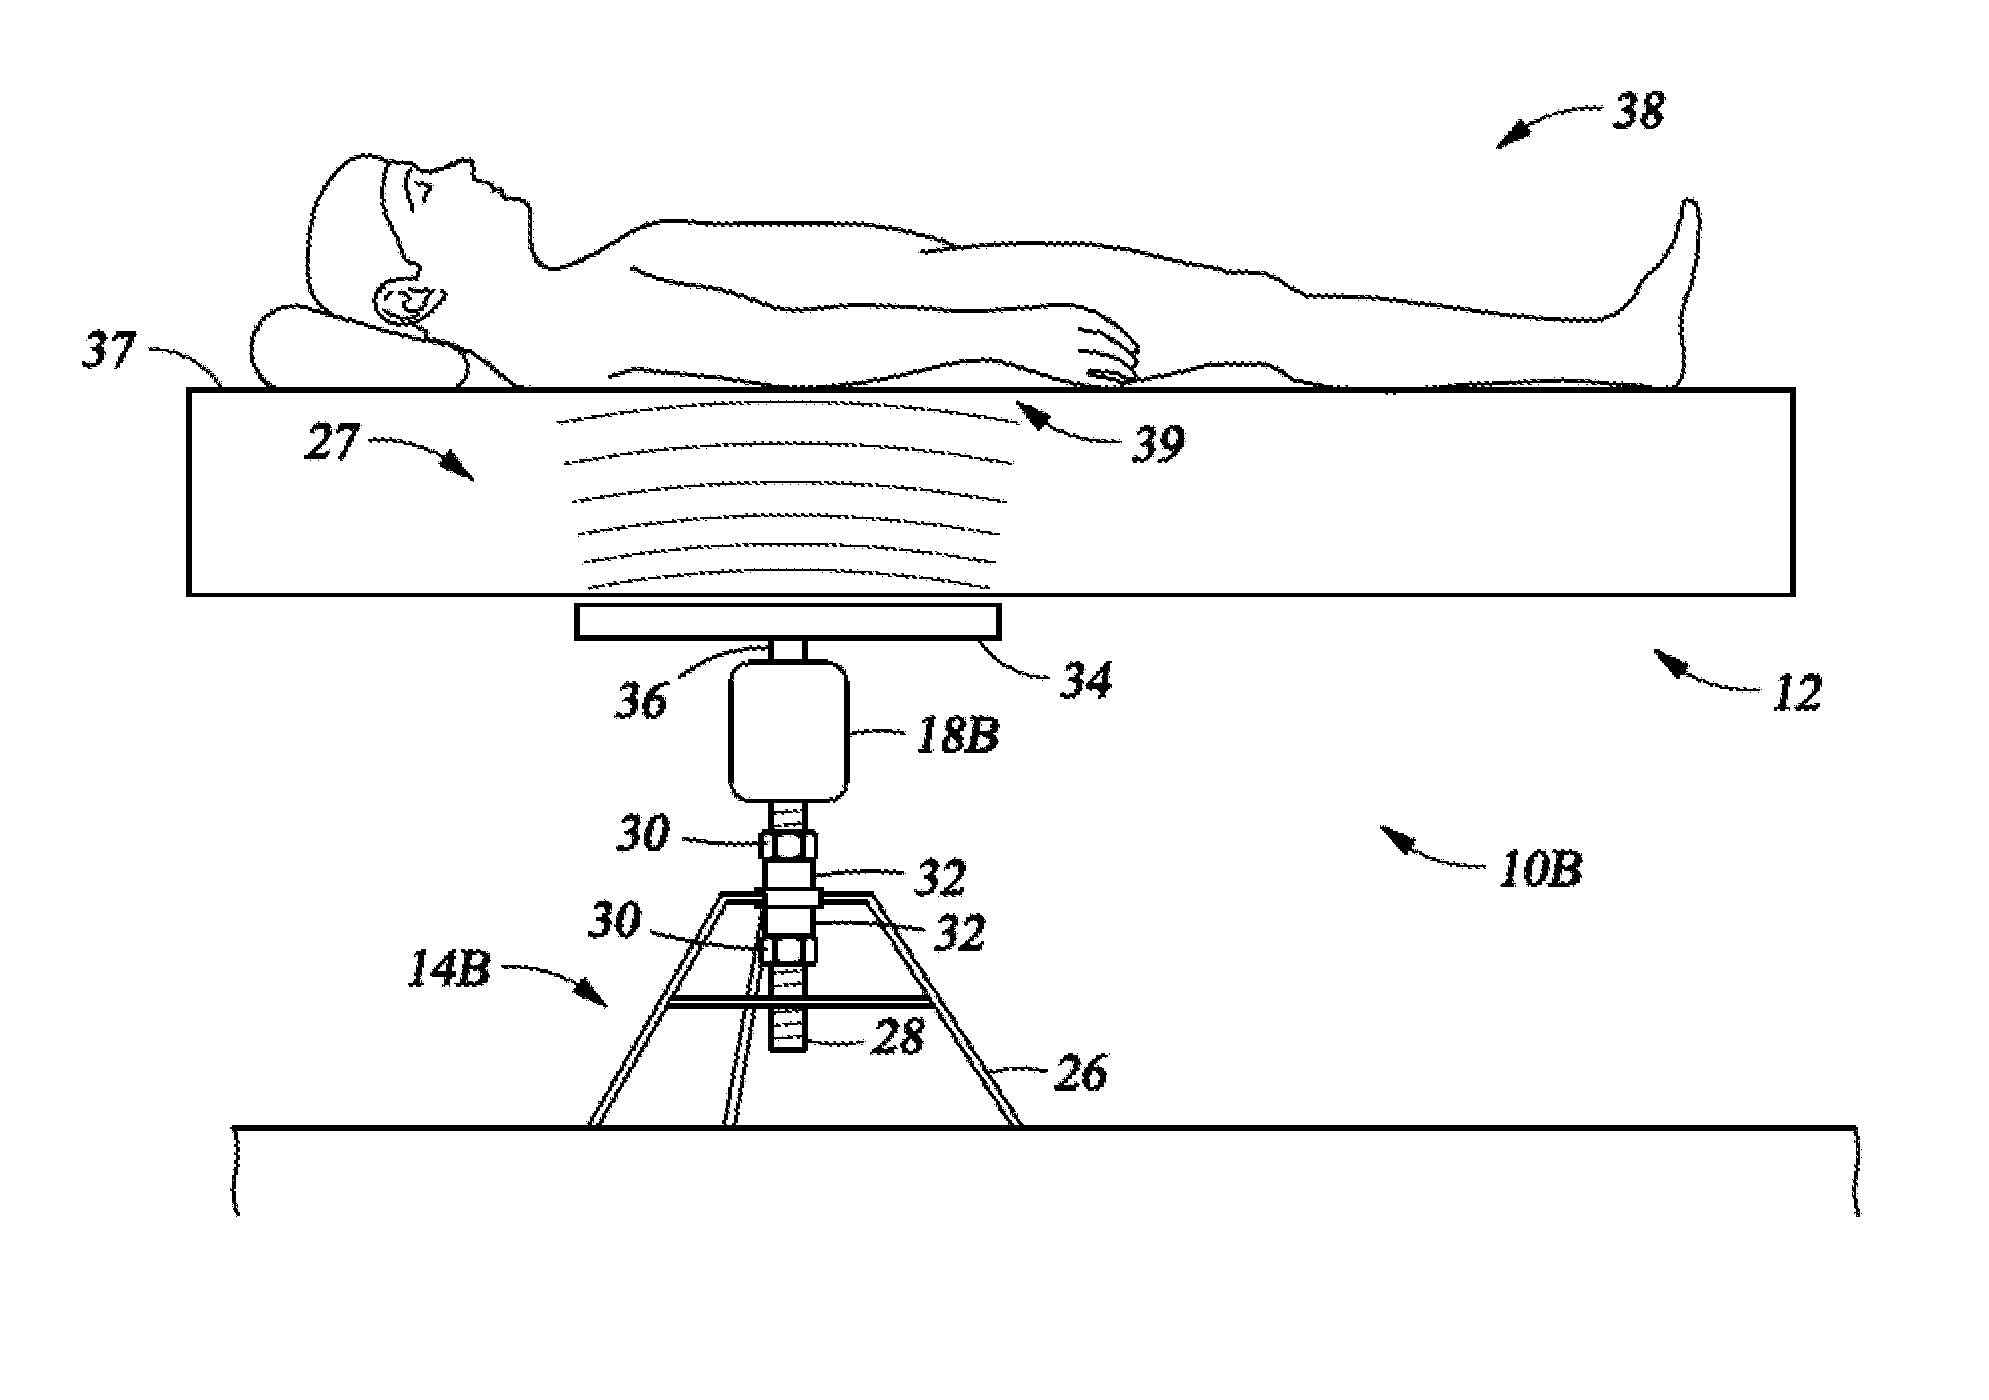 Device and method for treating nocturia